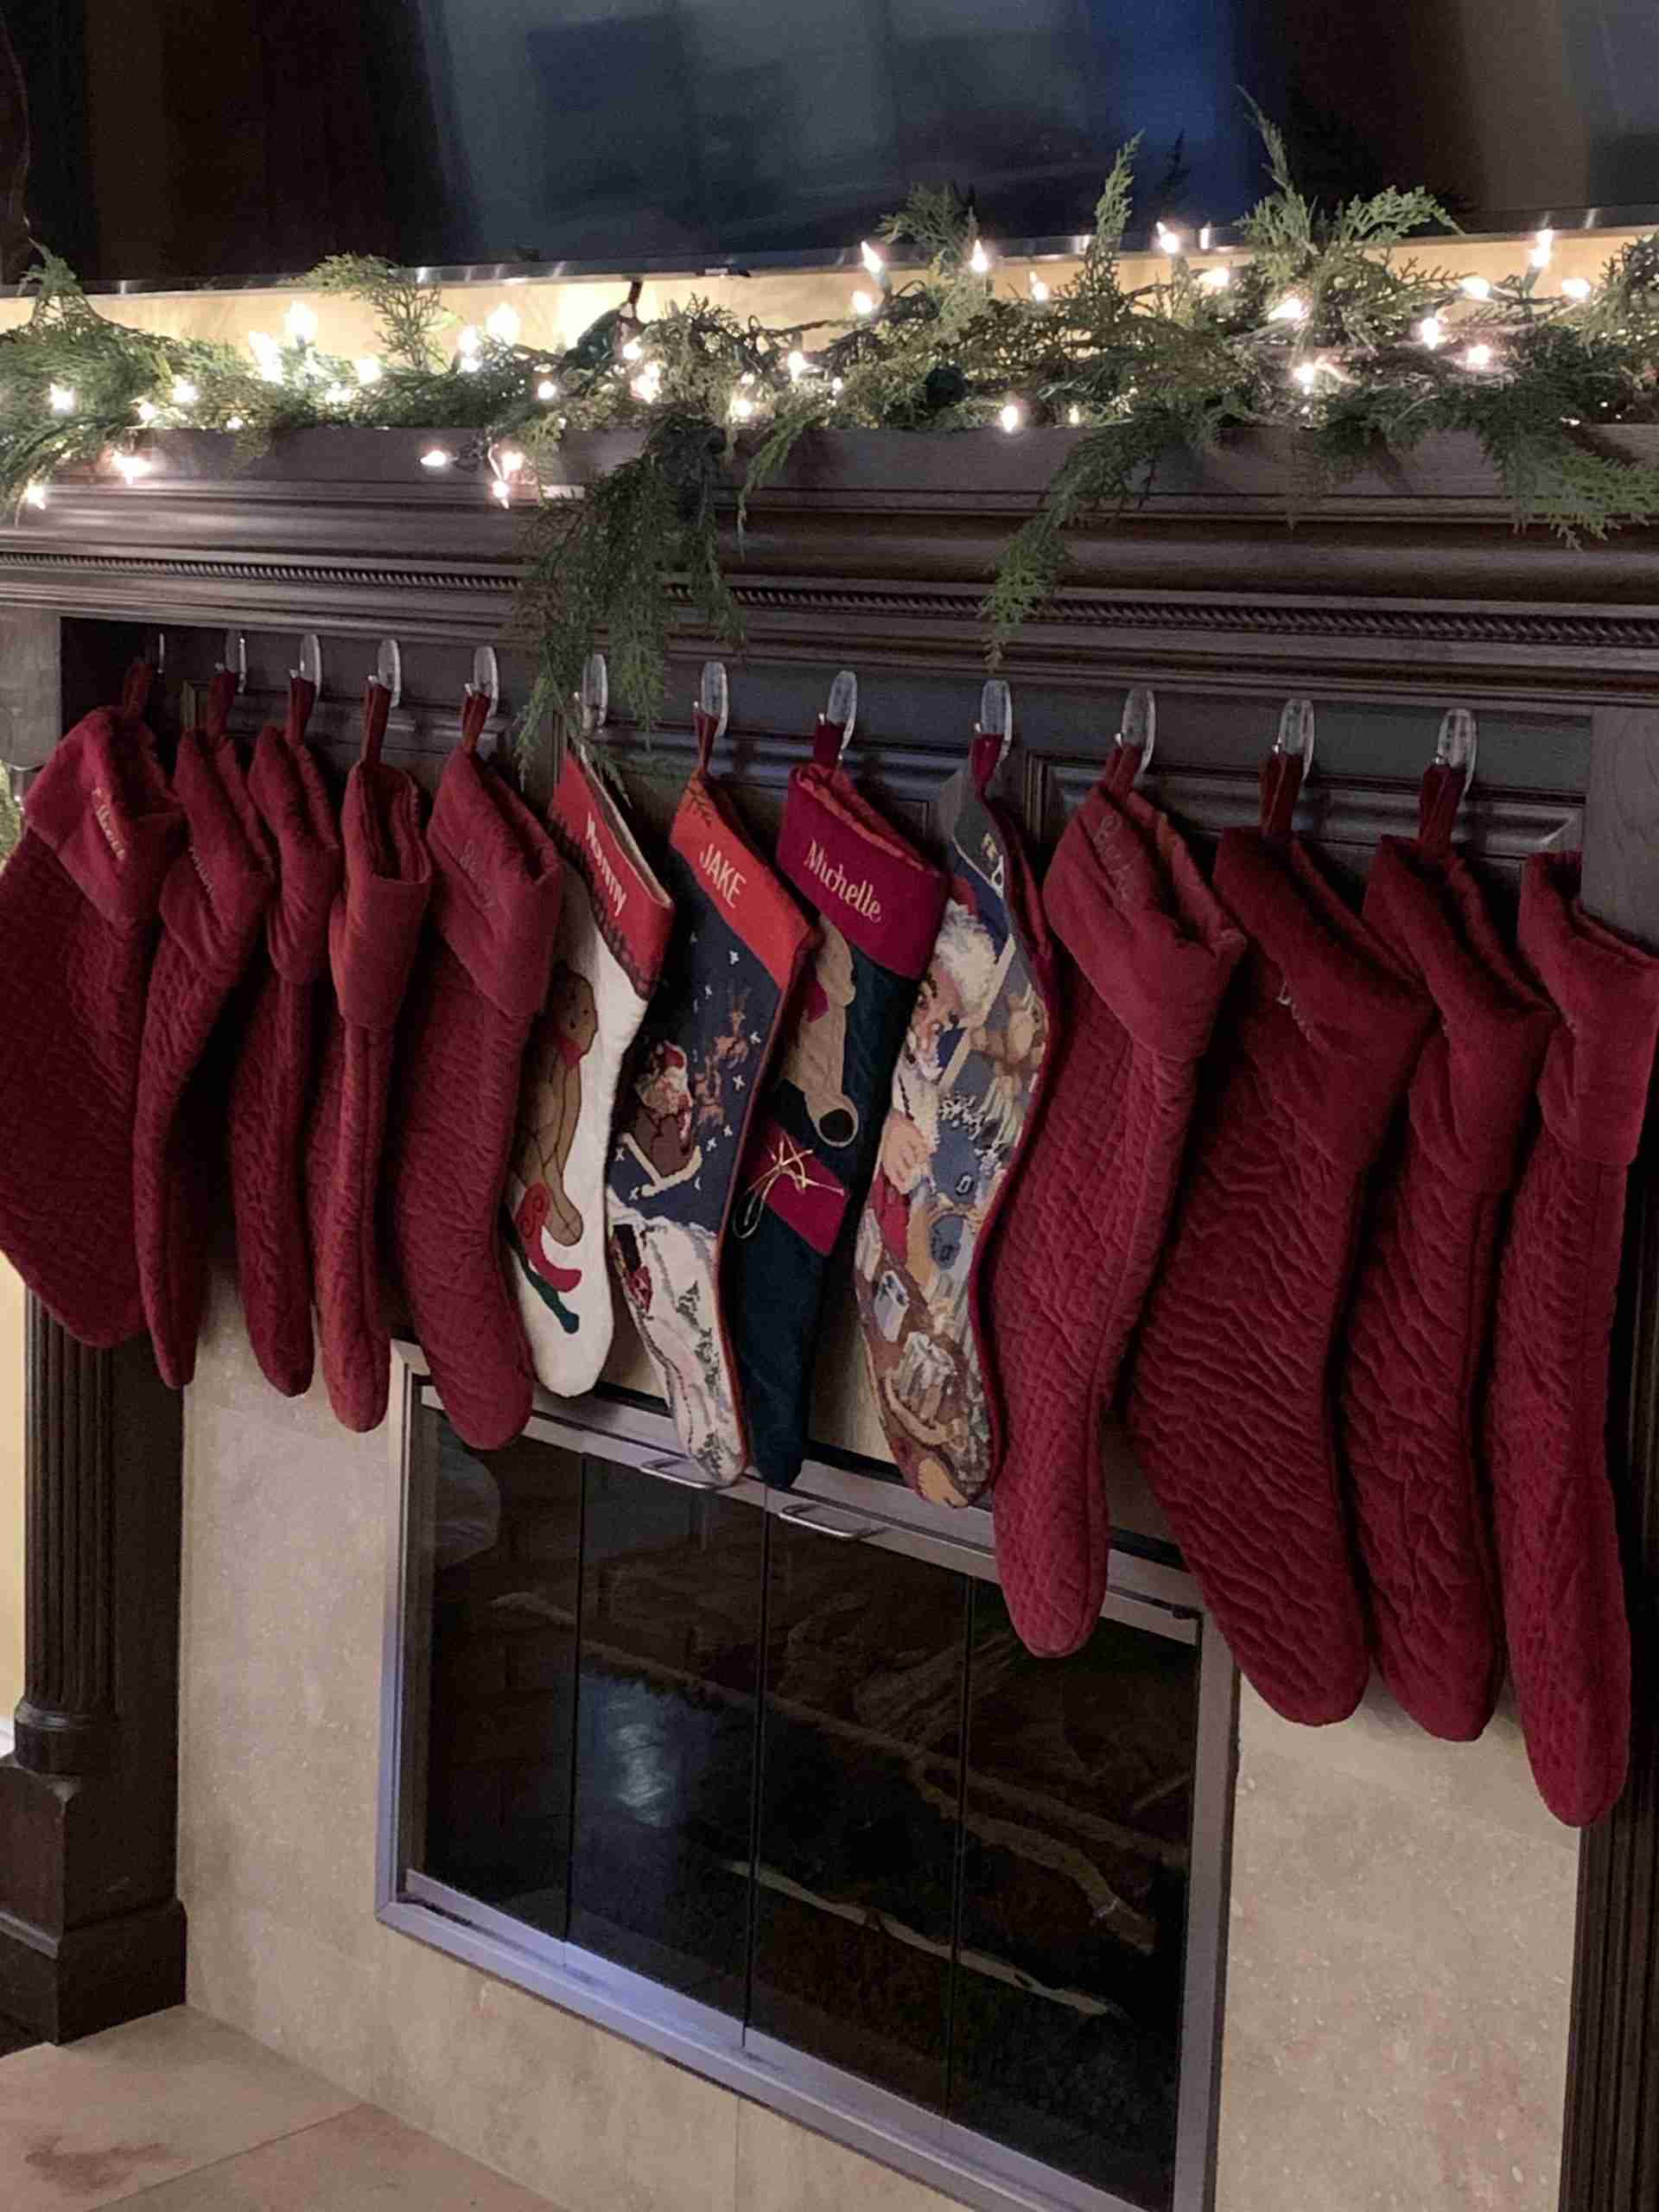 Christmas stockings hung by the fire under a white light lit mantel,